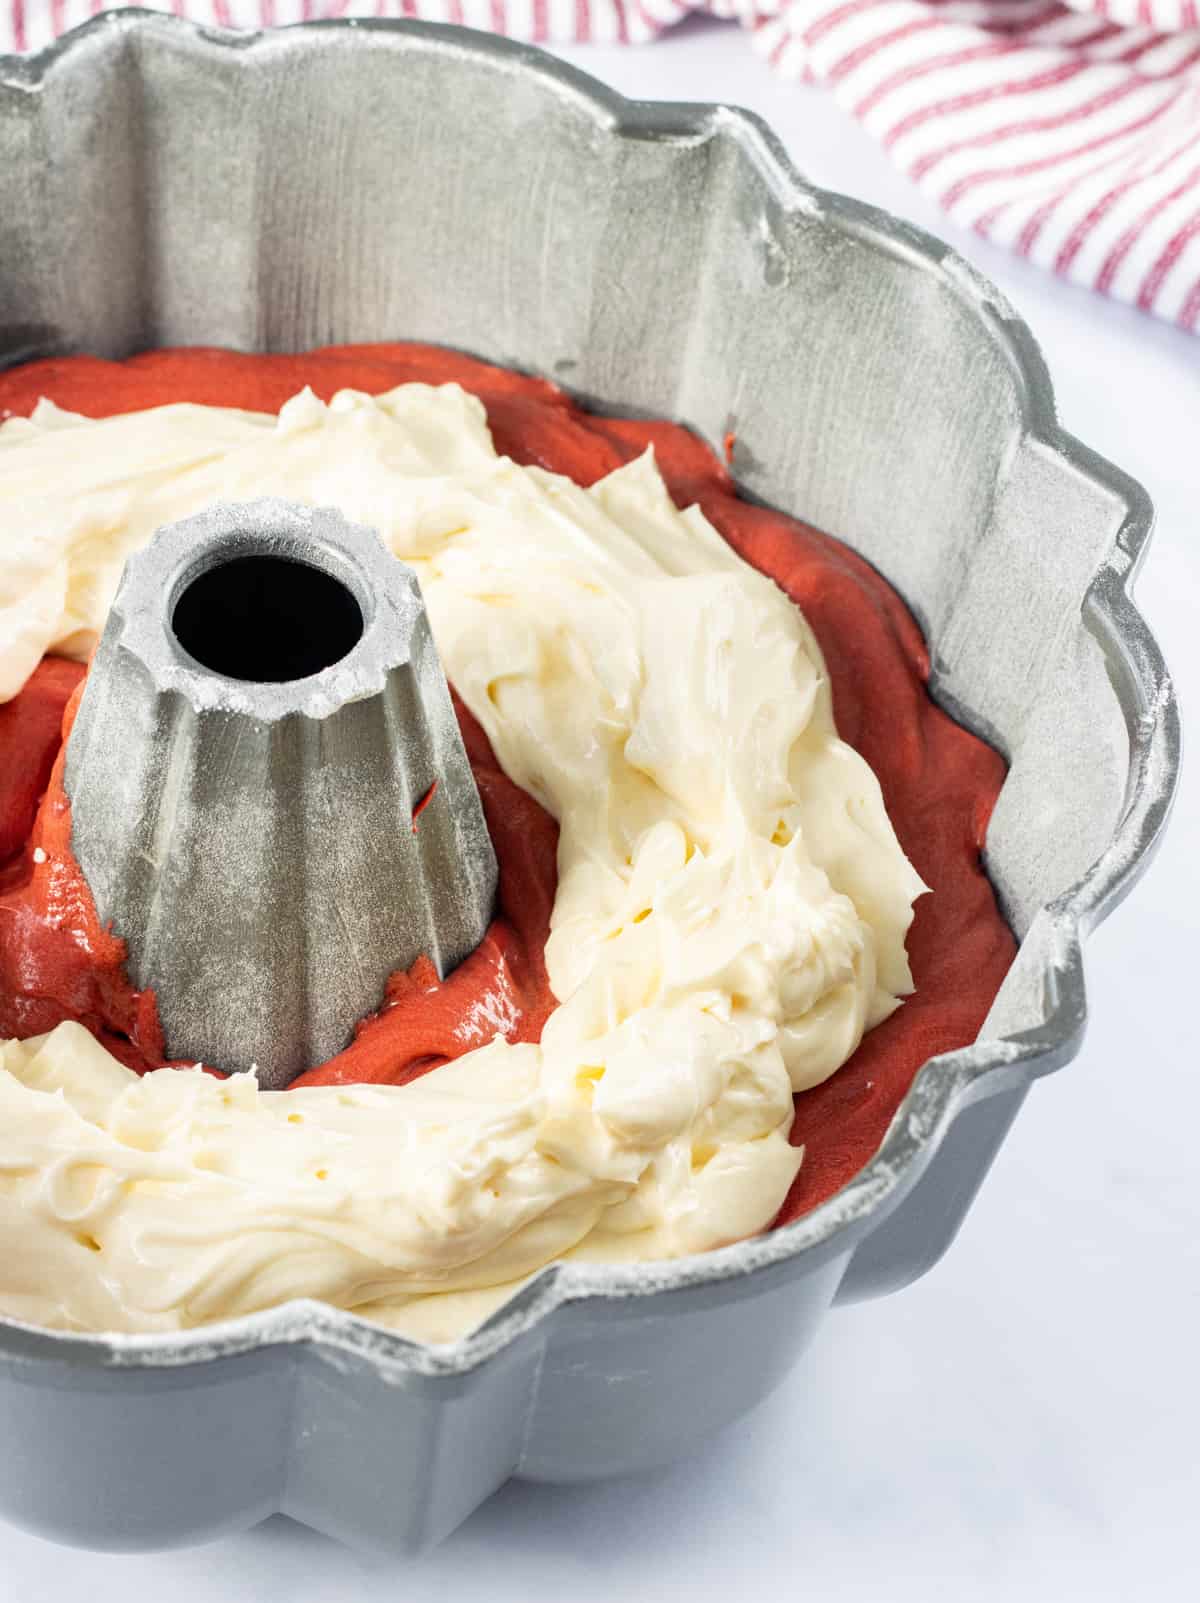 Bundt pan with a layer of red velvet batter and the cheesecake filling on top.